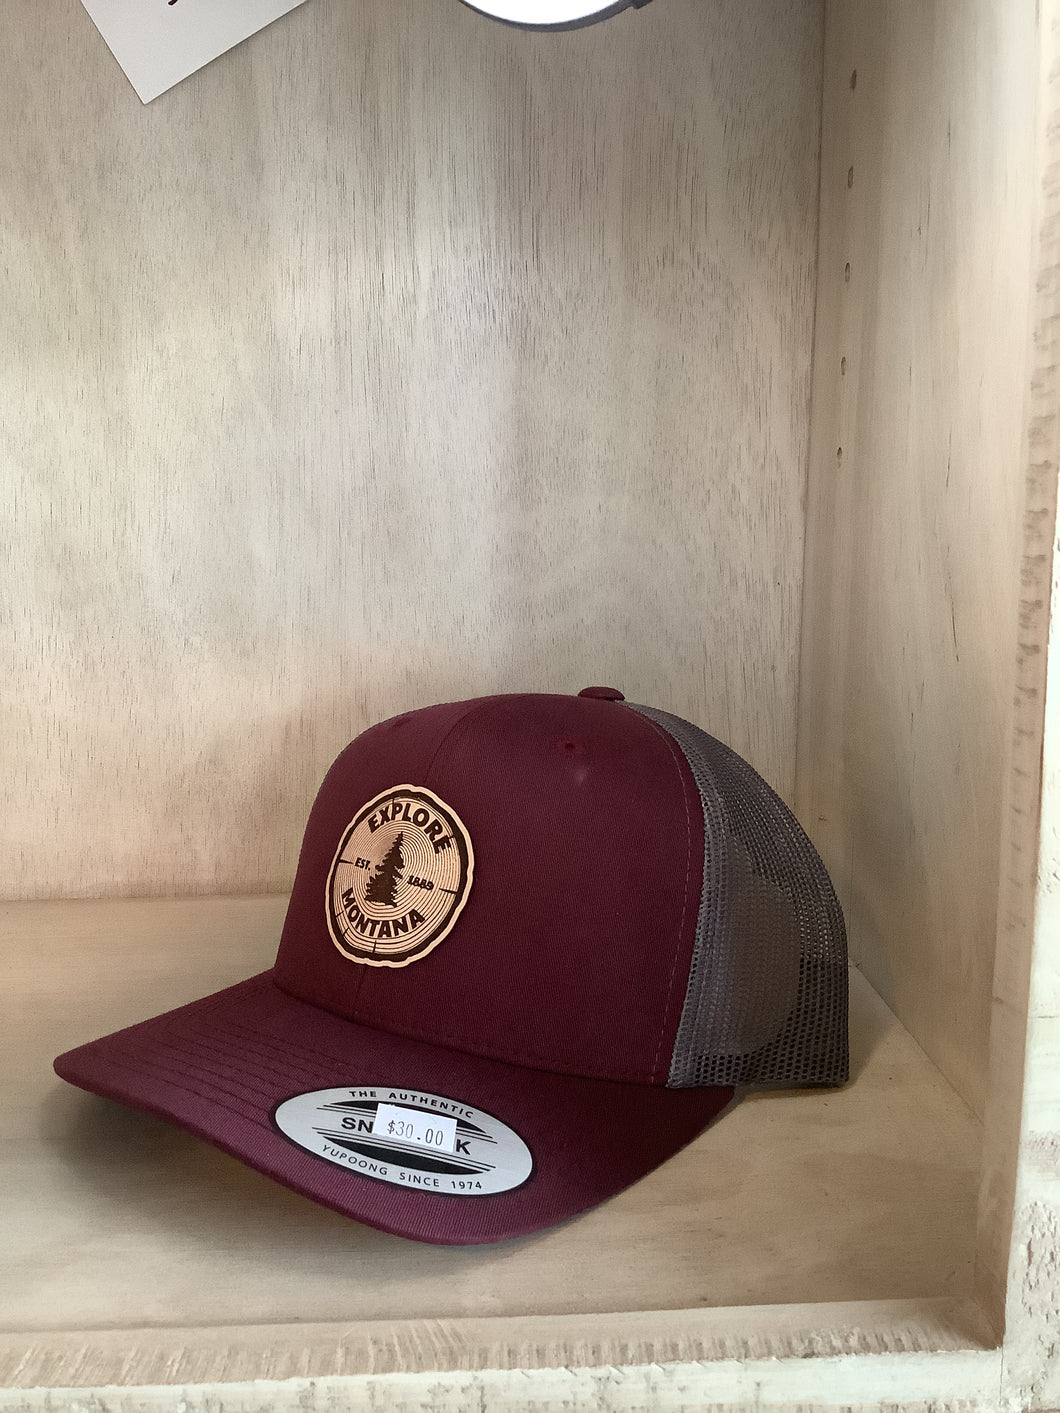 Hats & Shirts - By: MT Brand Apparel